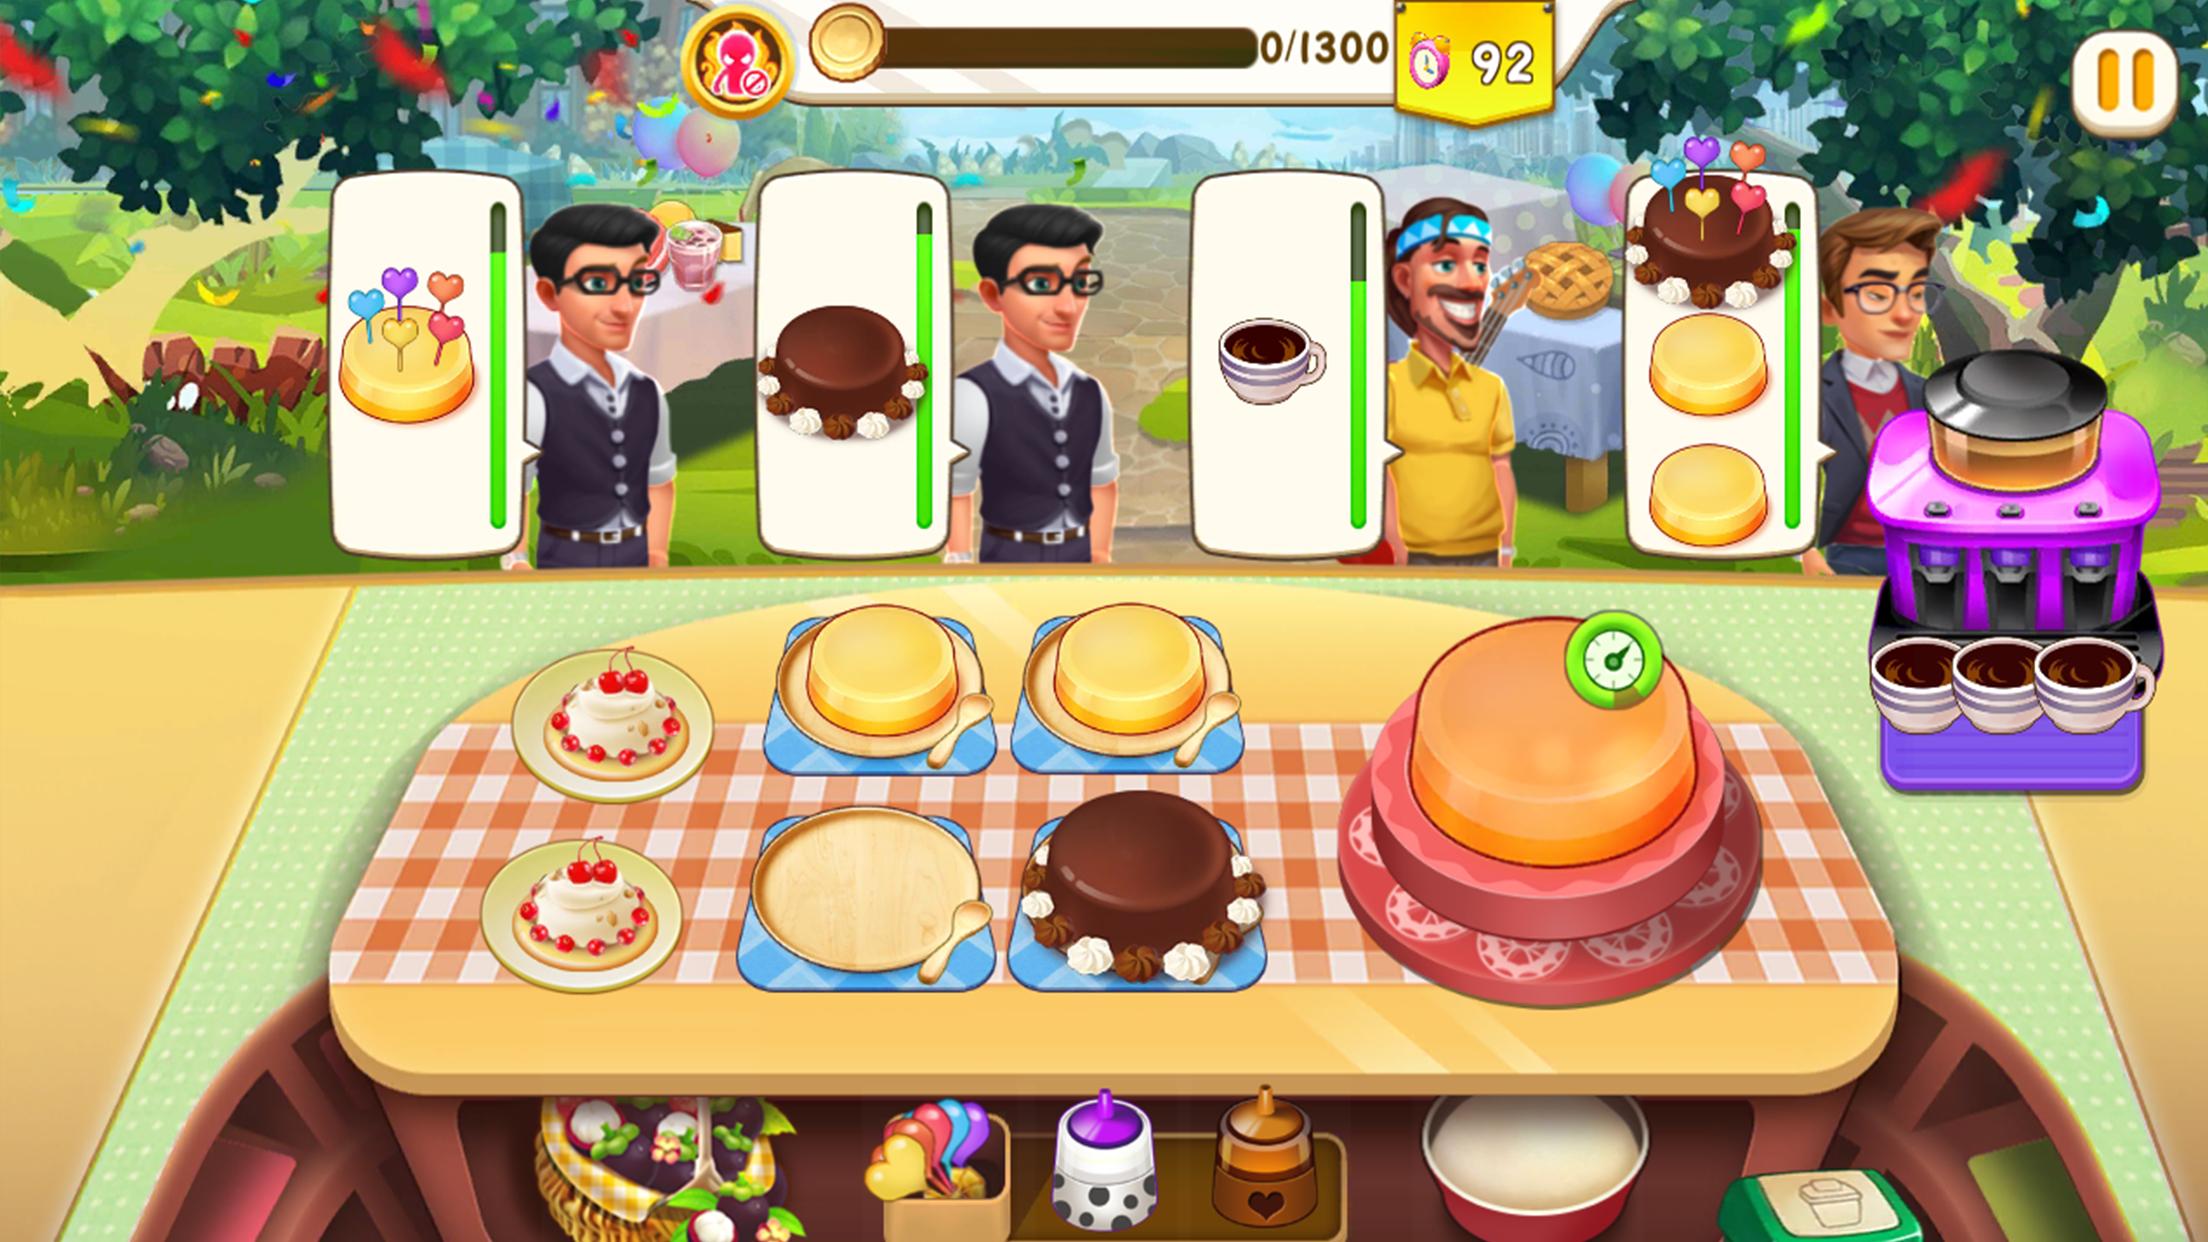 Cooking Rush Bake it to delicious 2.1.2 Screenshot 6